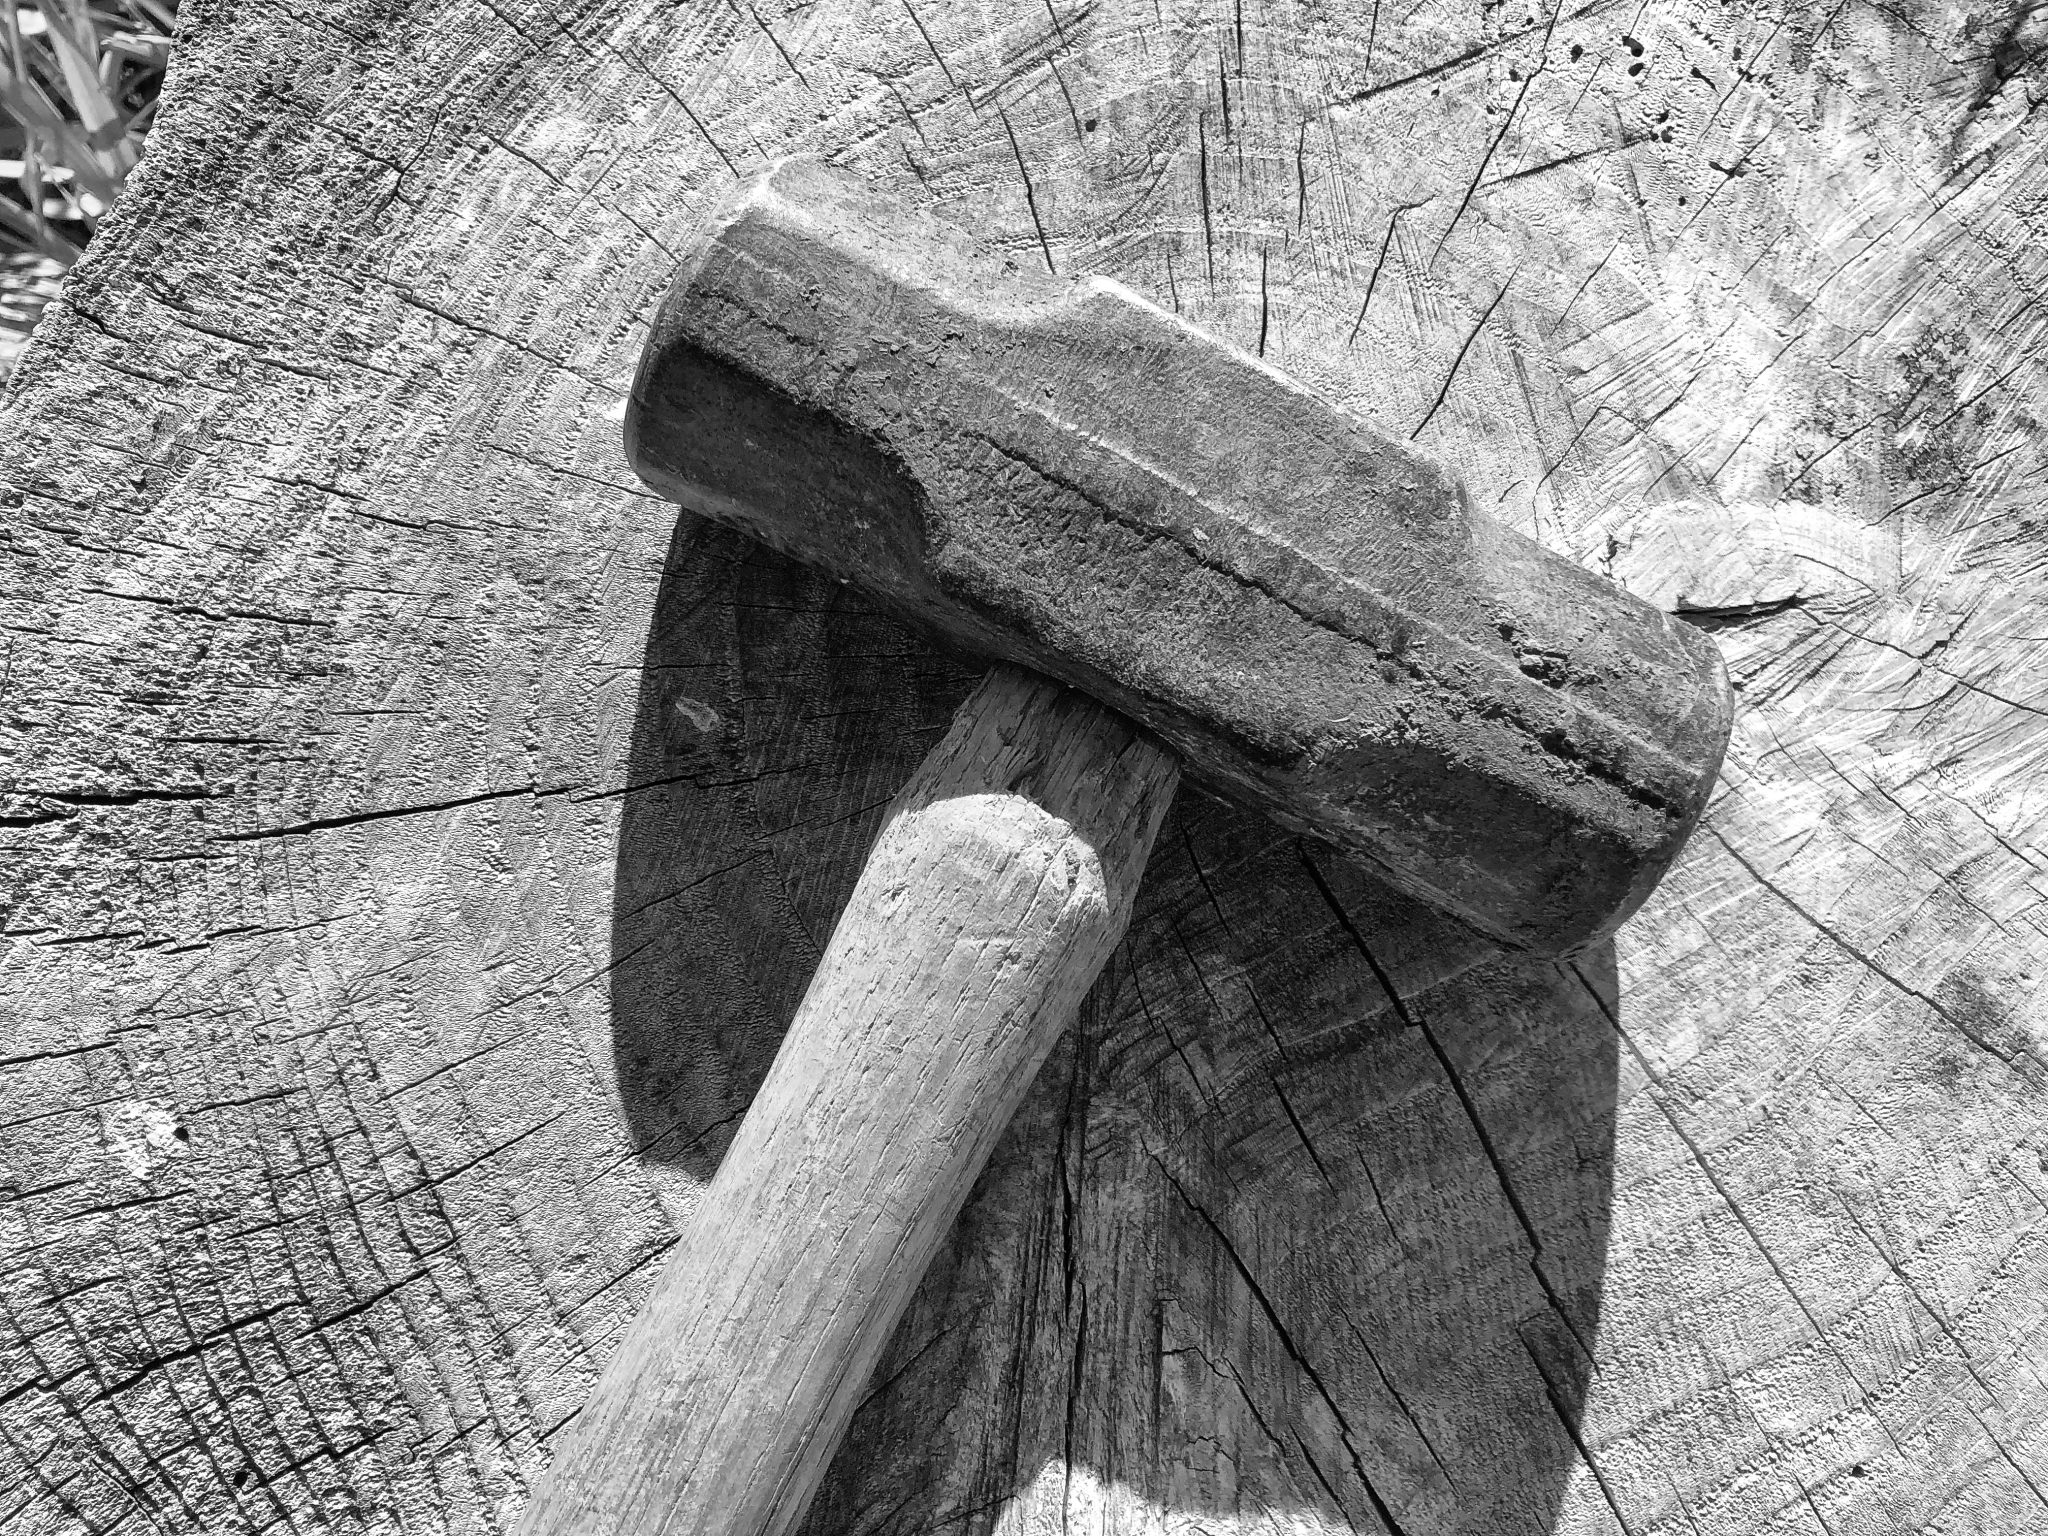 Black and white image of a mallet resting atop a tree stump